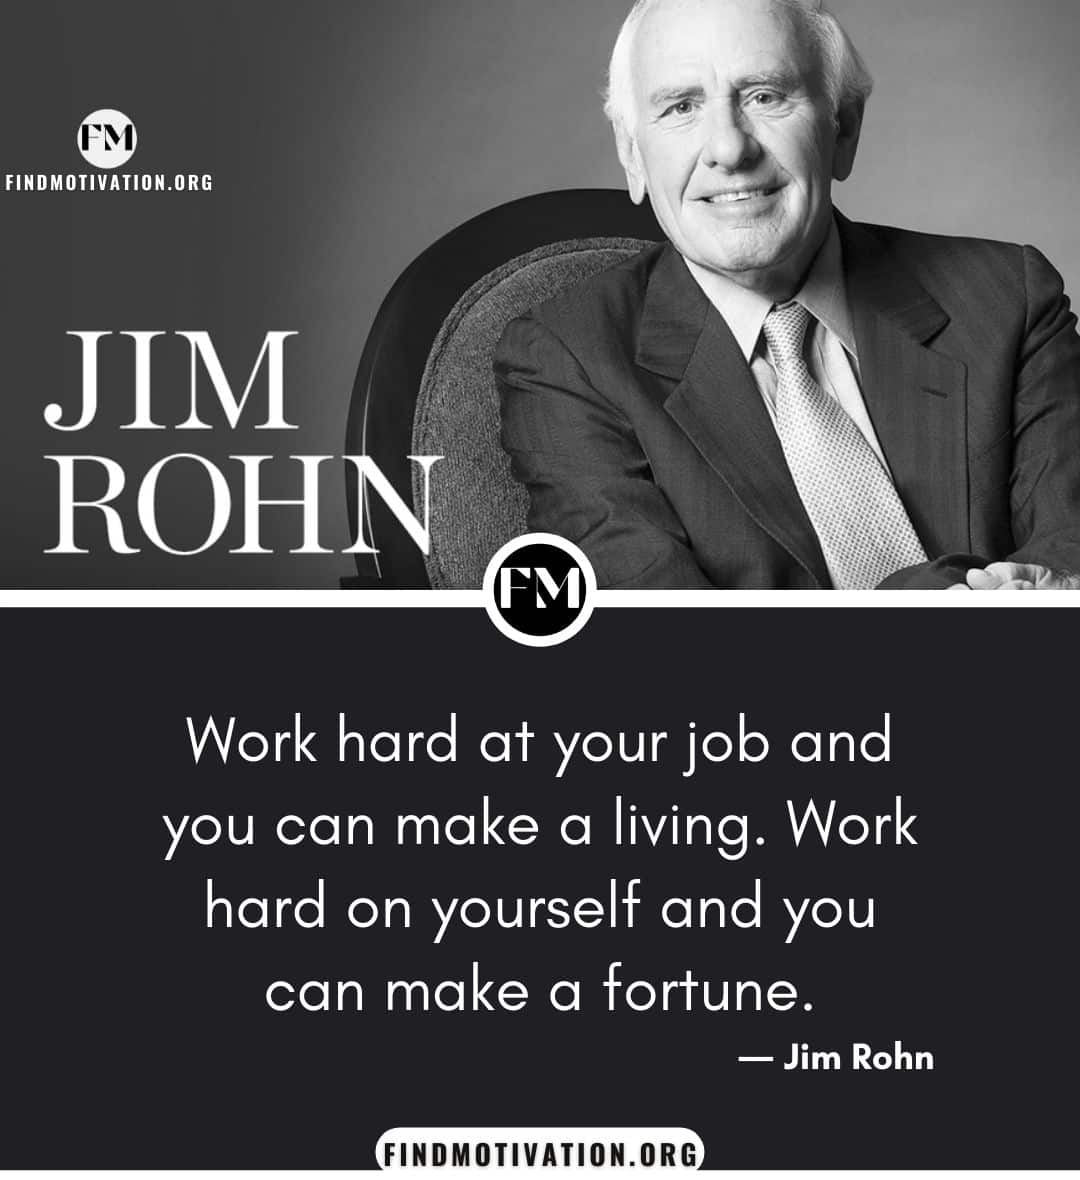 Jim Rohn personal development quotes to find the motivation to take responsibility to make yourself better